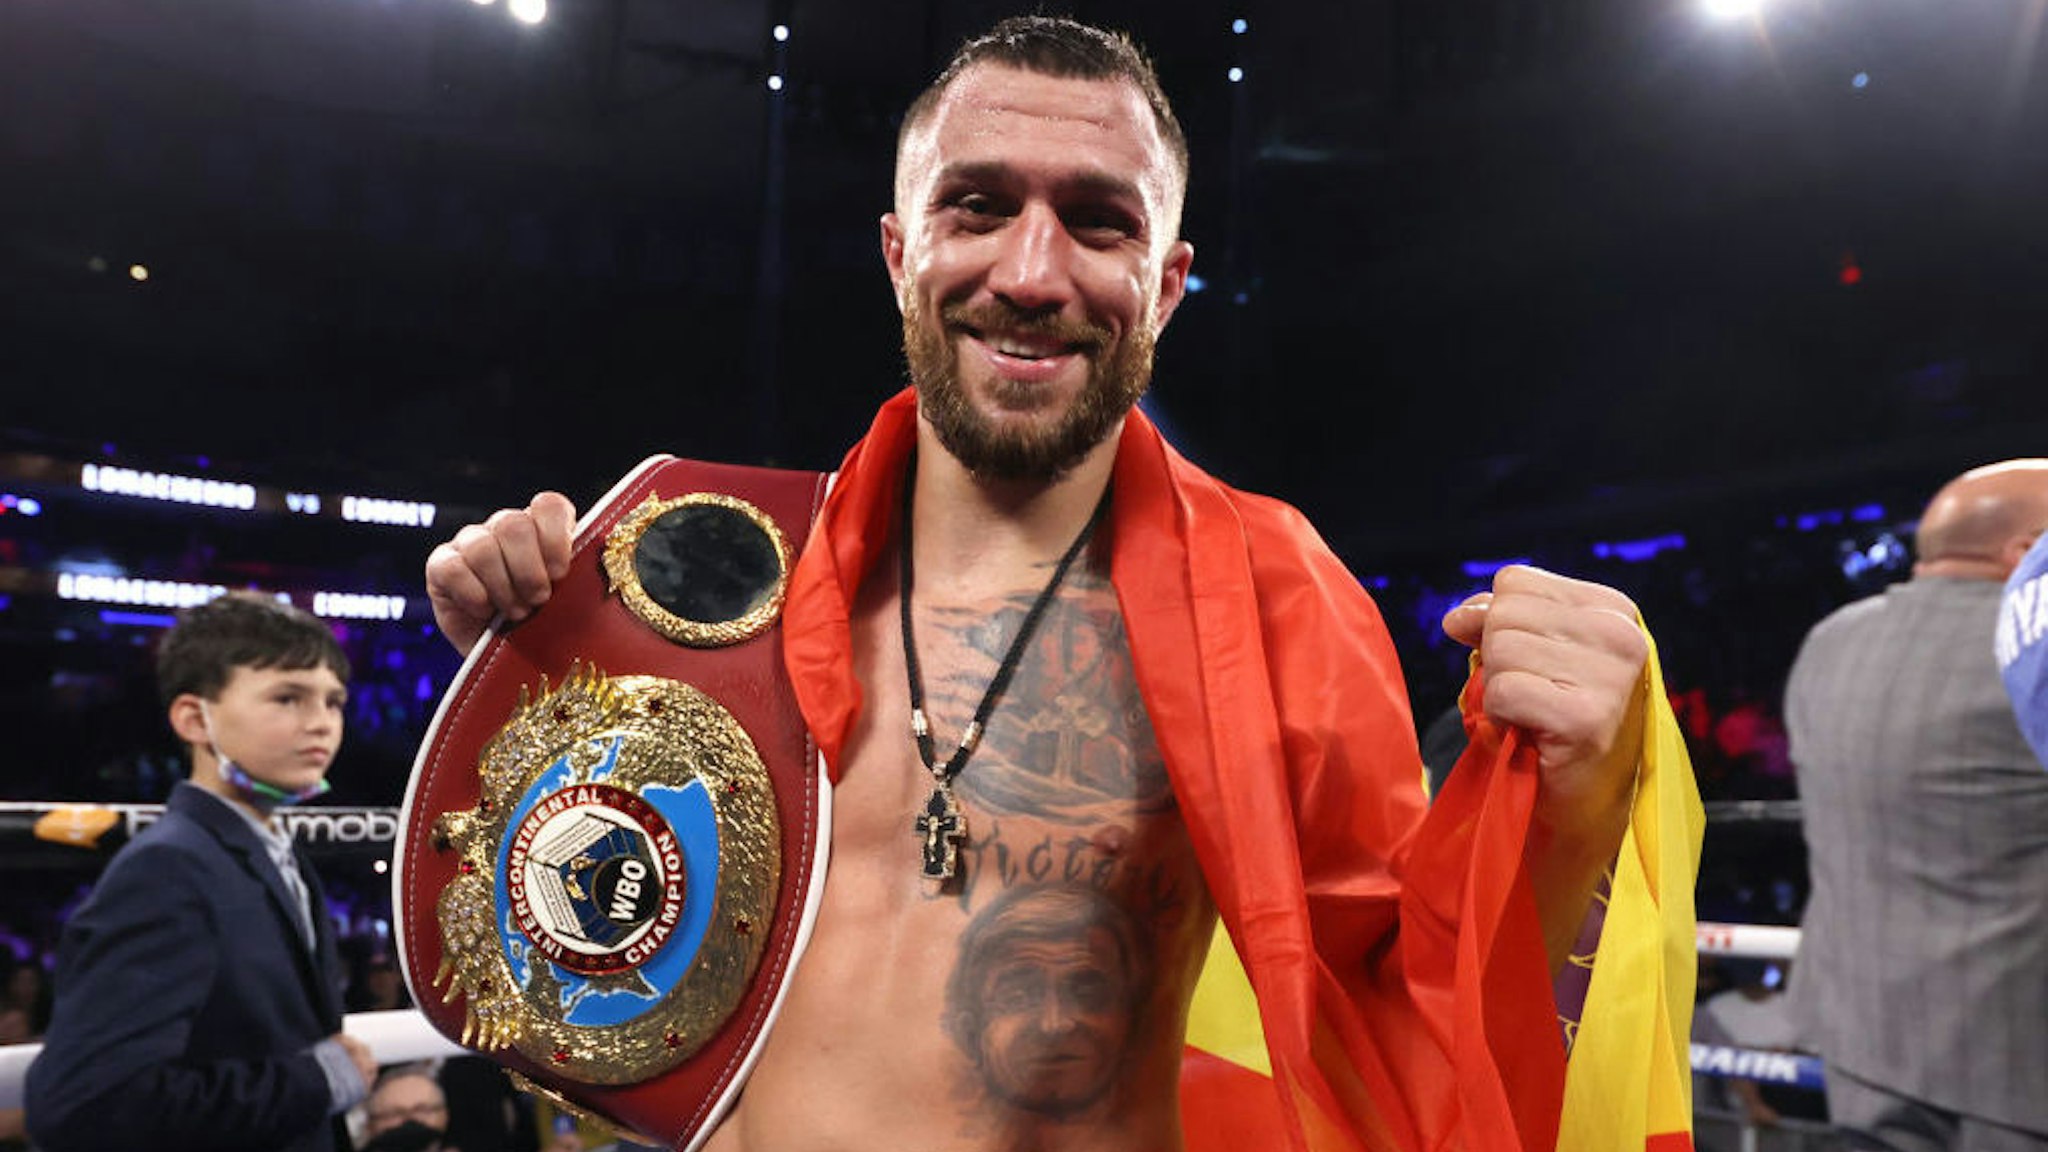 NEW YORK, NEW YORK - DECEMBER 11: Vasiliy Lomachenko is victorious as he defeats Richard Commey for the WBO intercontinental lightweight championship at Madison Square Garden on December 11, 2021 in New York City. (Photo by Mikey Williams/Top Rank Inc via Getty Images)